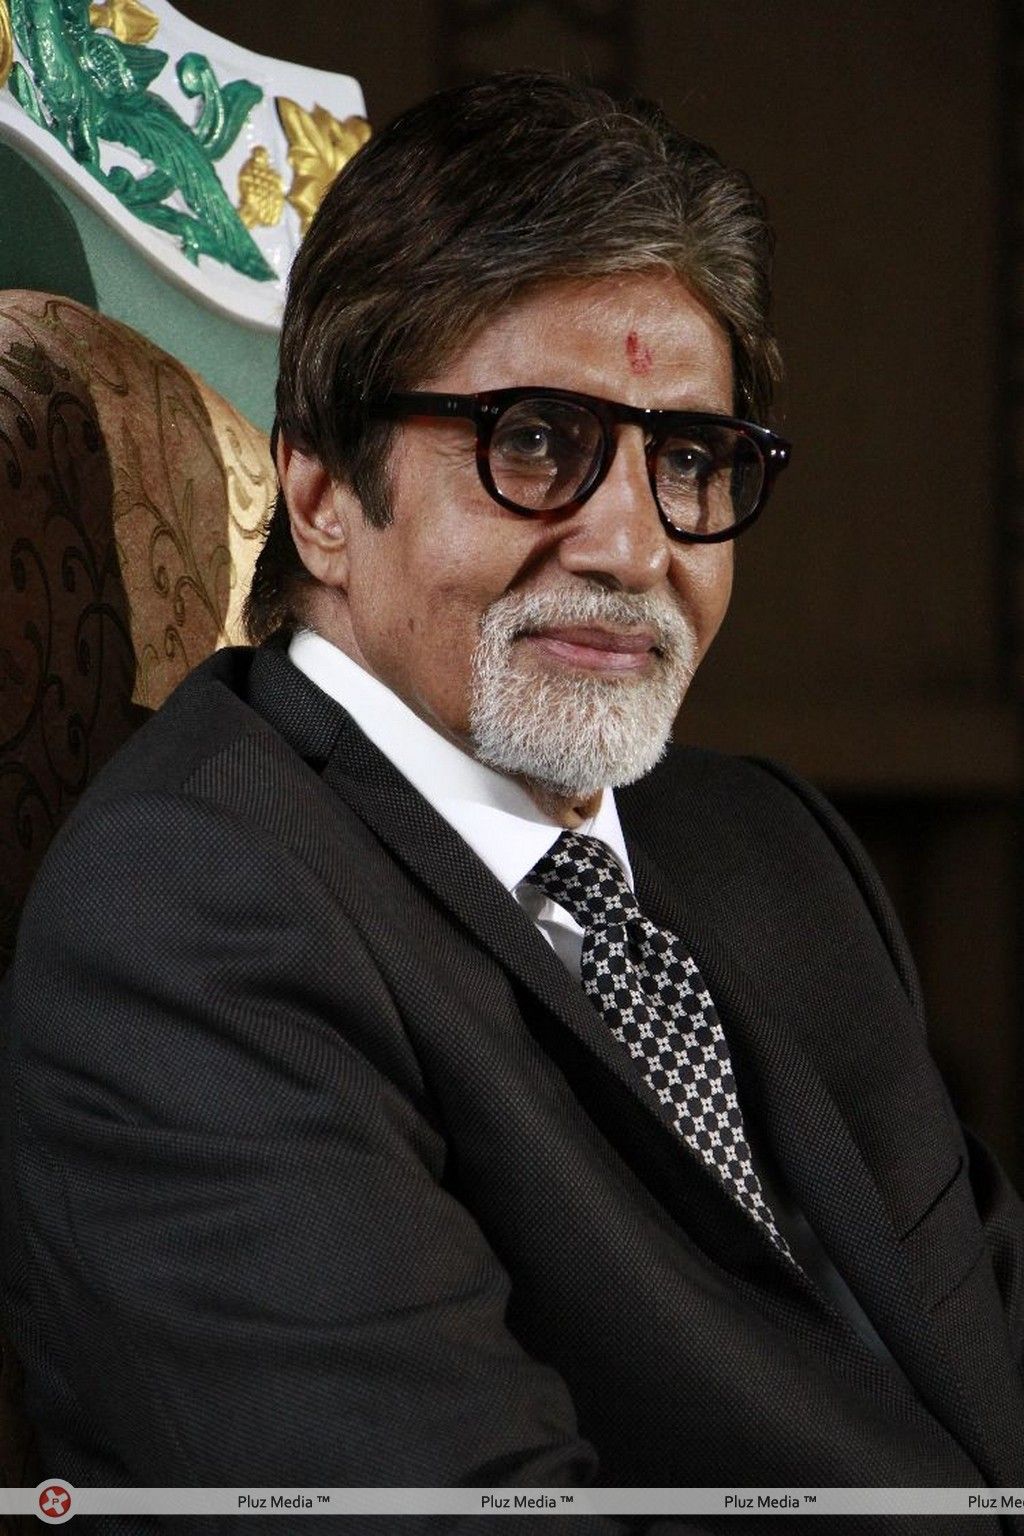 Amitabh Bachchan - 10 th CIFF Closing Ceremony and Award Function Stills | Picture 345153